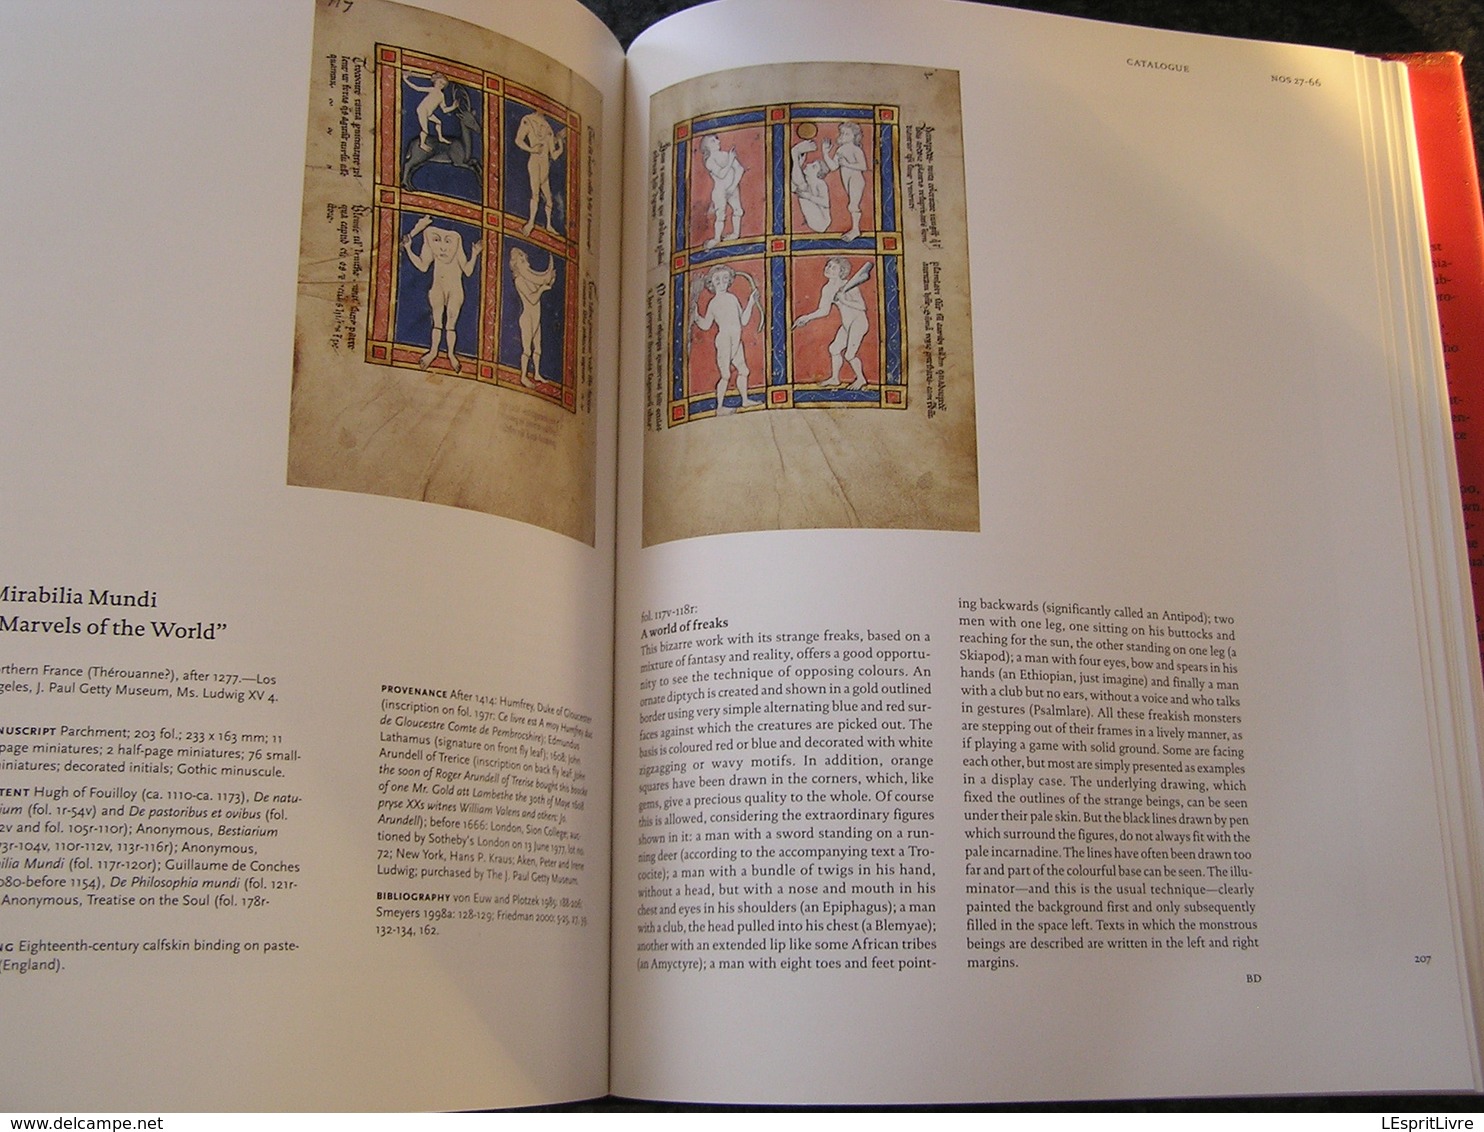 MEDIEVAL MASTERY Book Illumination From Charlemagne to Charles The Bold 800 1475  Moyen Age Gospels Religious Church